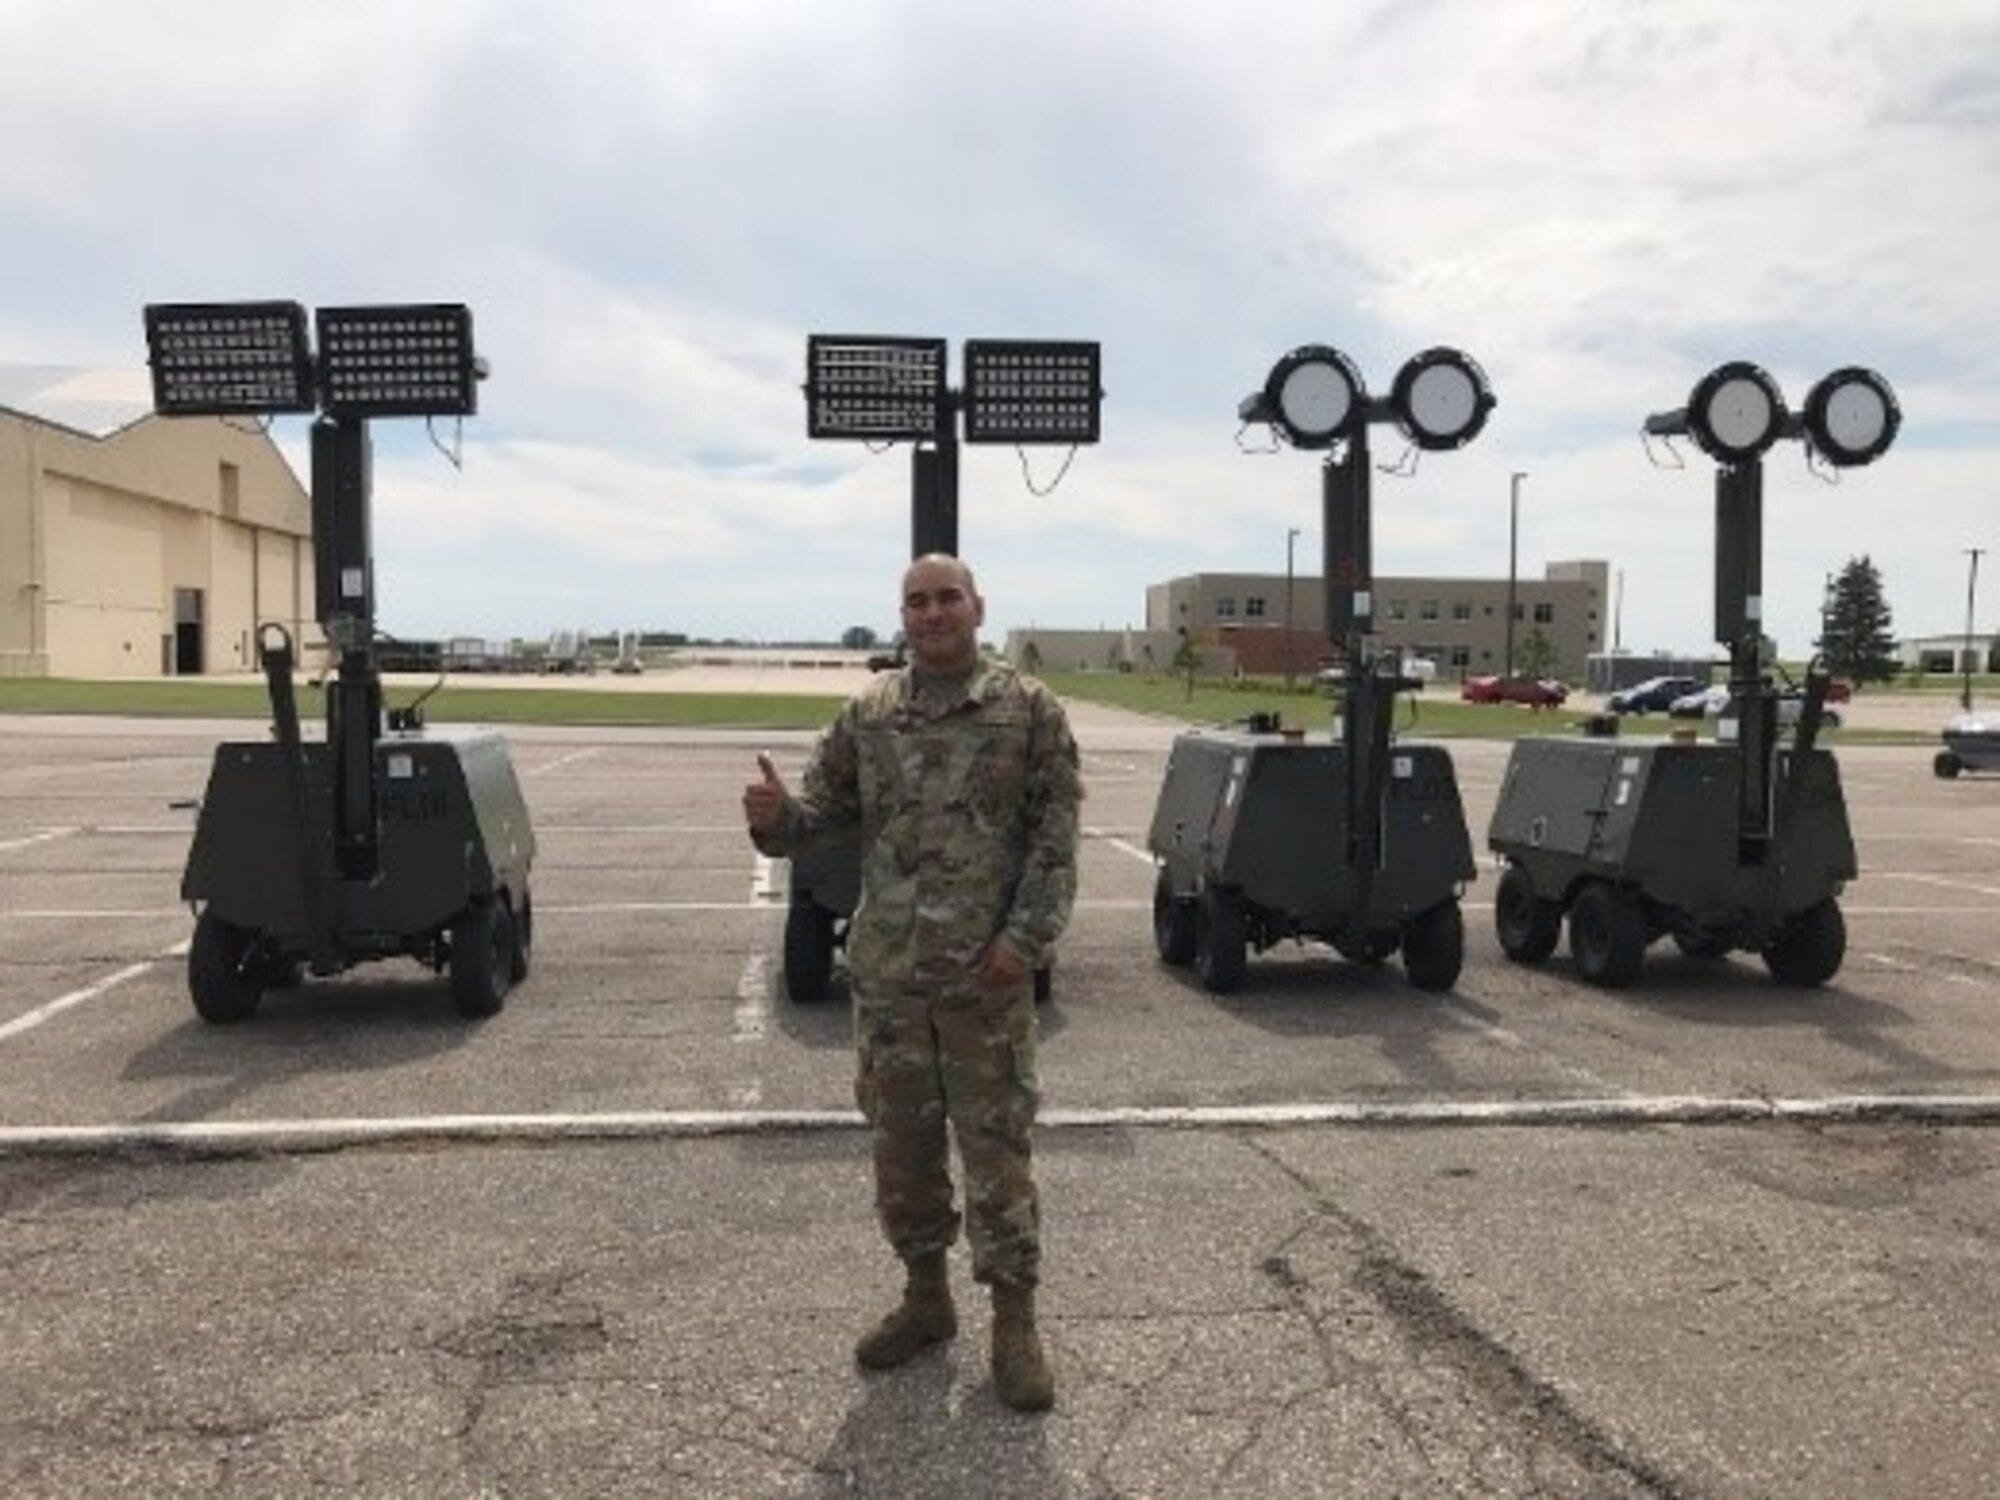 Air Force Global Strike Command 5th Maintenance Squadron AGE Section Chief, Master Sgt. Miguel Alvarez, in front of four flightline light carts retro-fitted with the two different LED fixture options for testing. (U.S. Air Force photo/Senior Airman Matthew Brown)